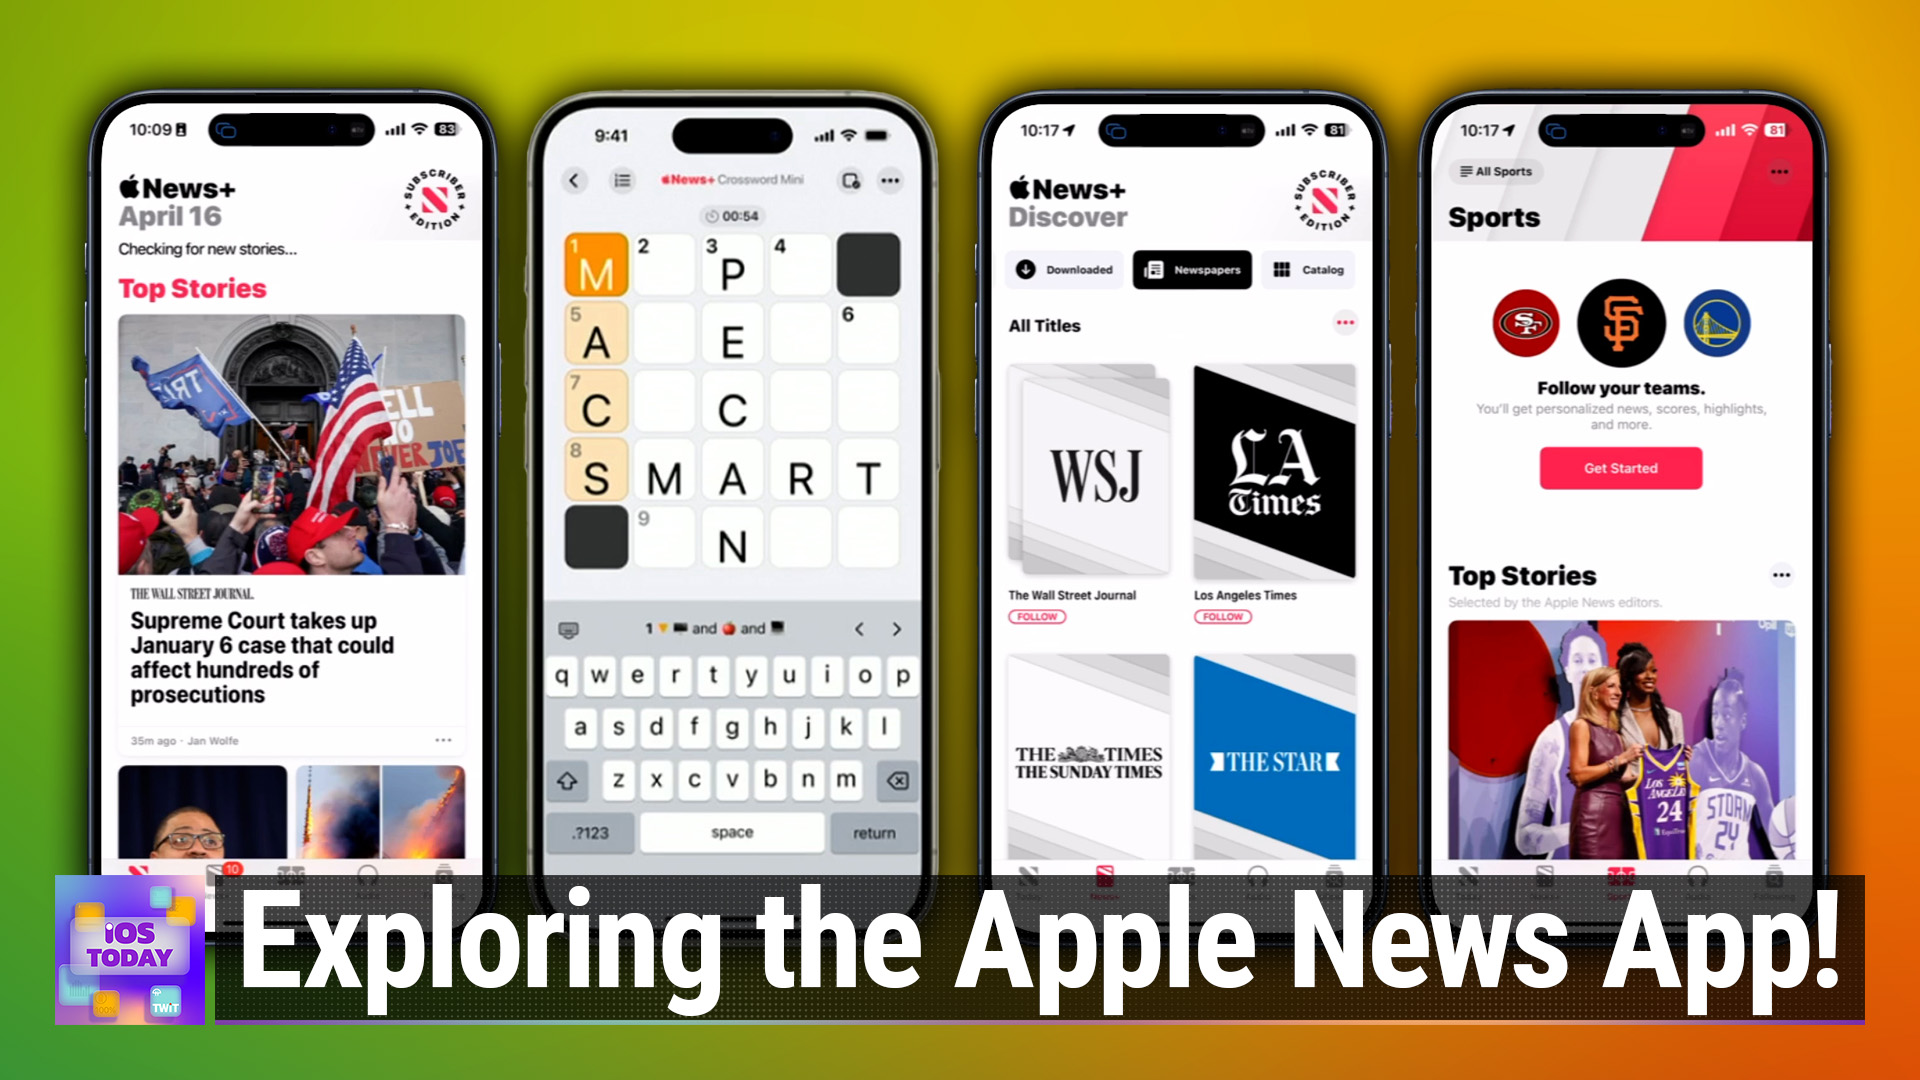 Apple News: What You Need To Know (iOS Today #700)